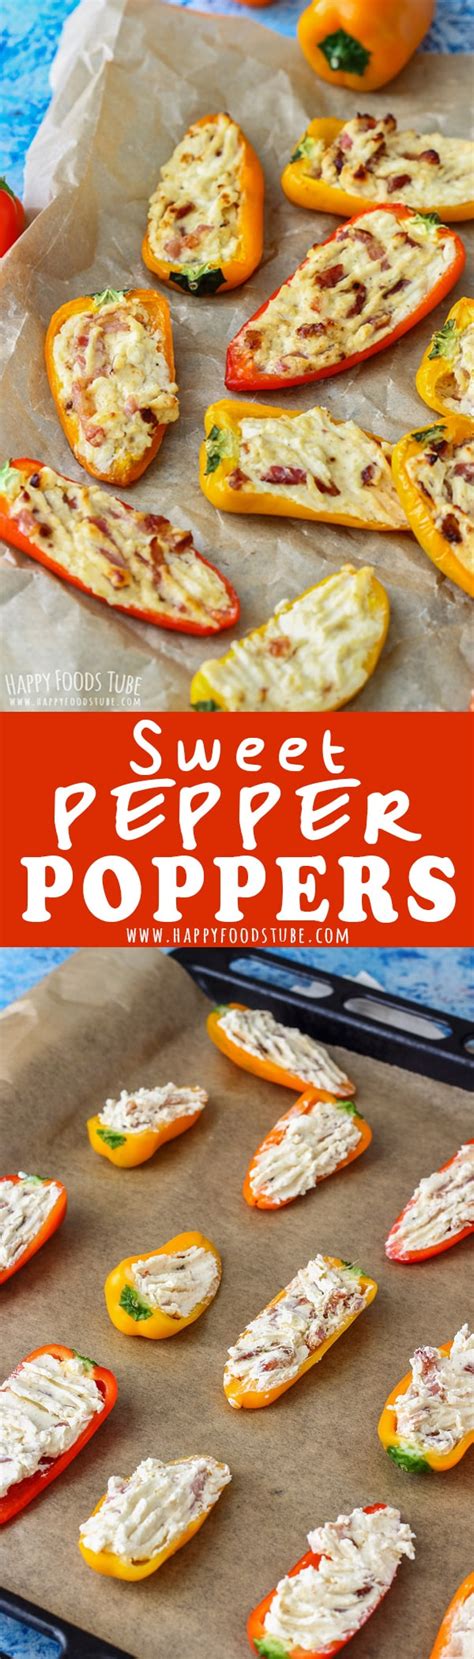 sweet-pepper-poppers-recipe-happy-foods-tube image